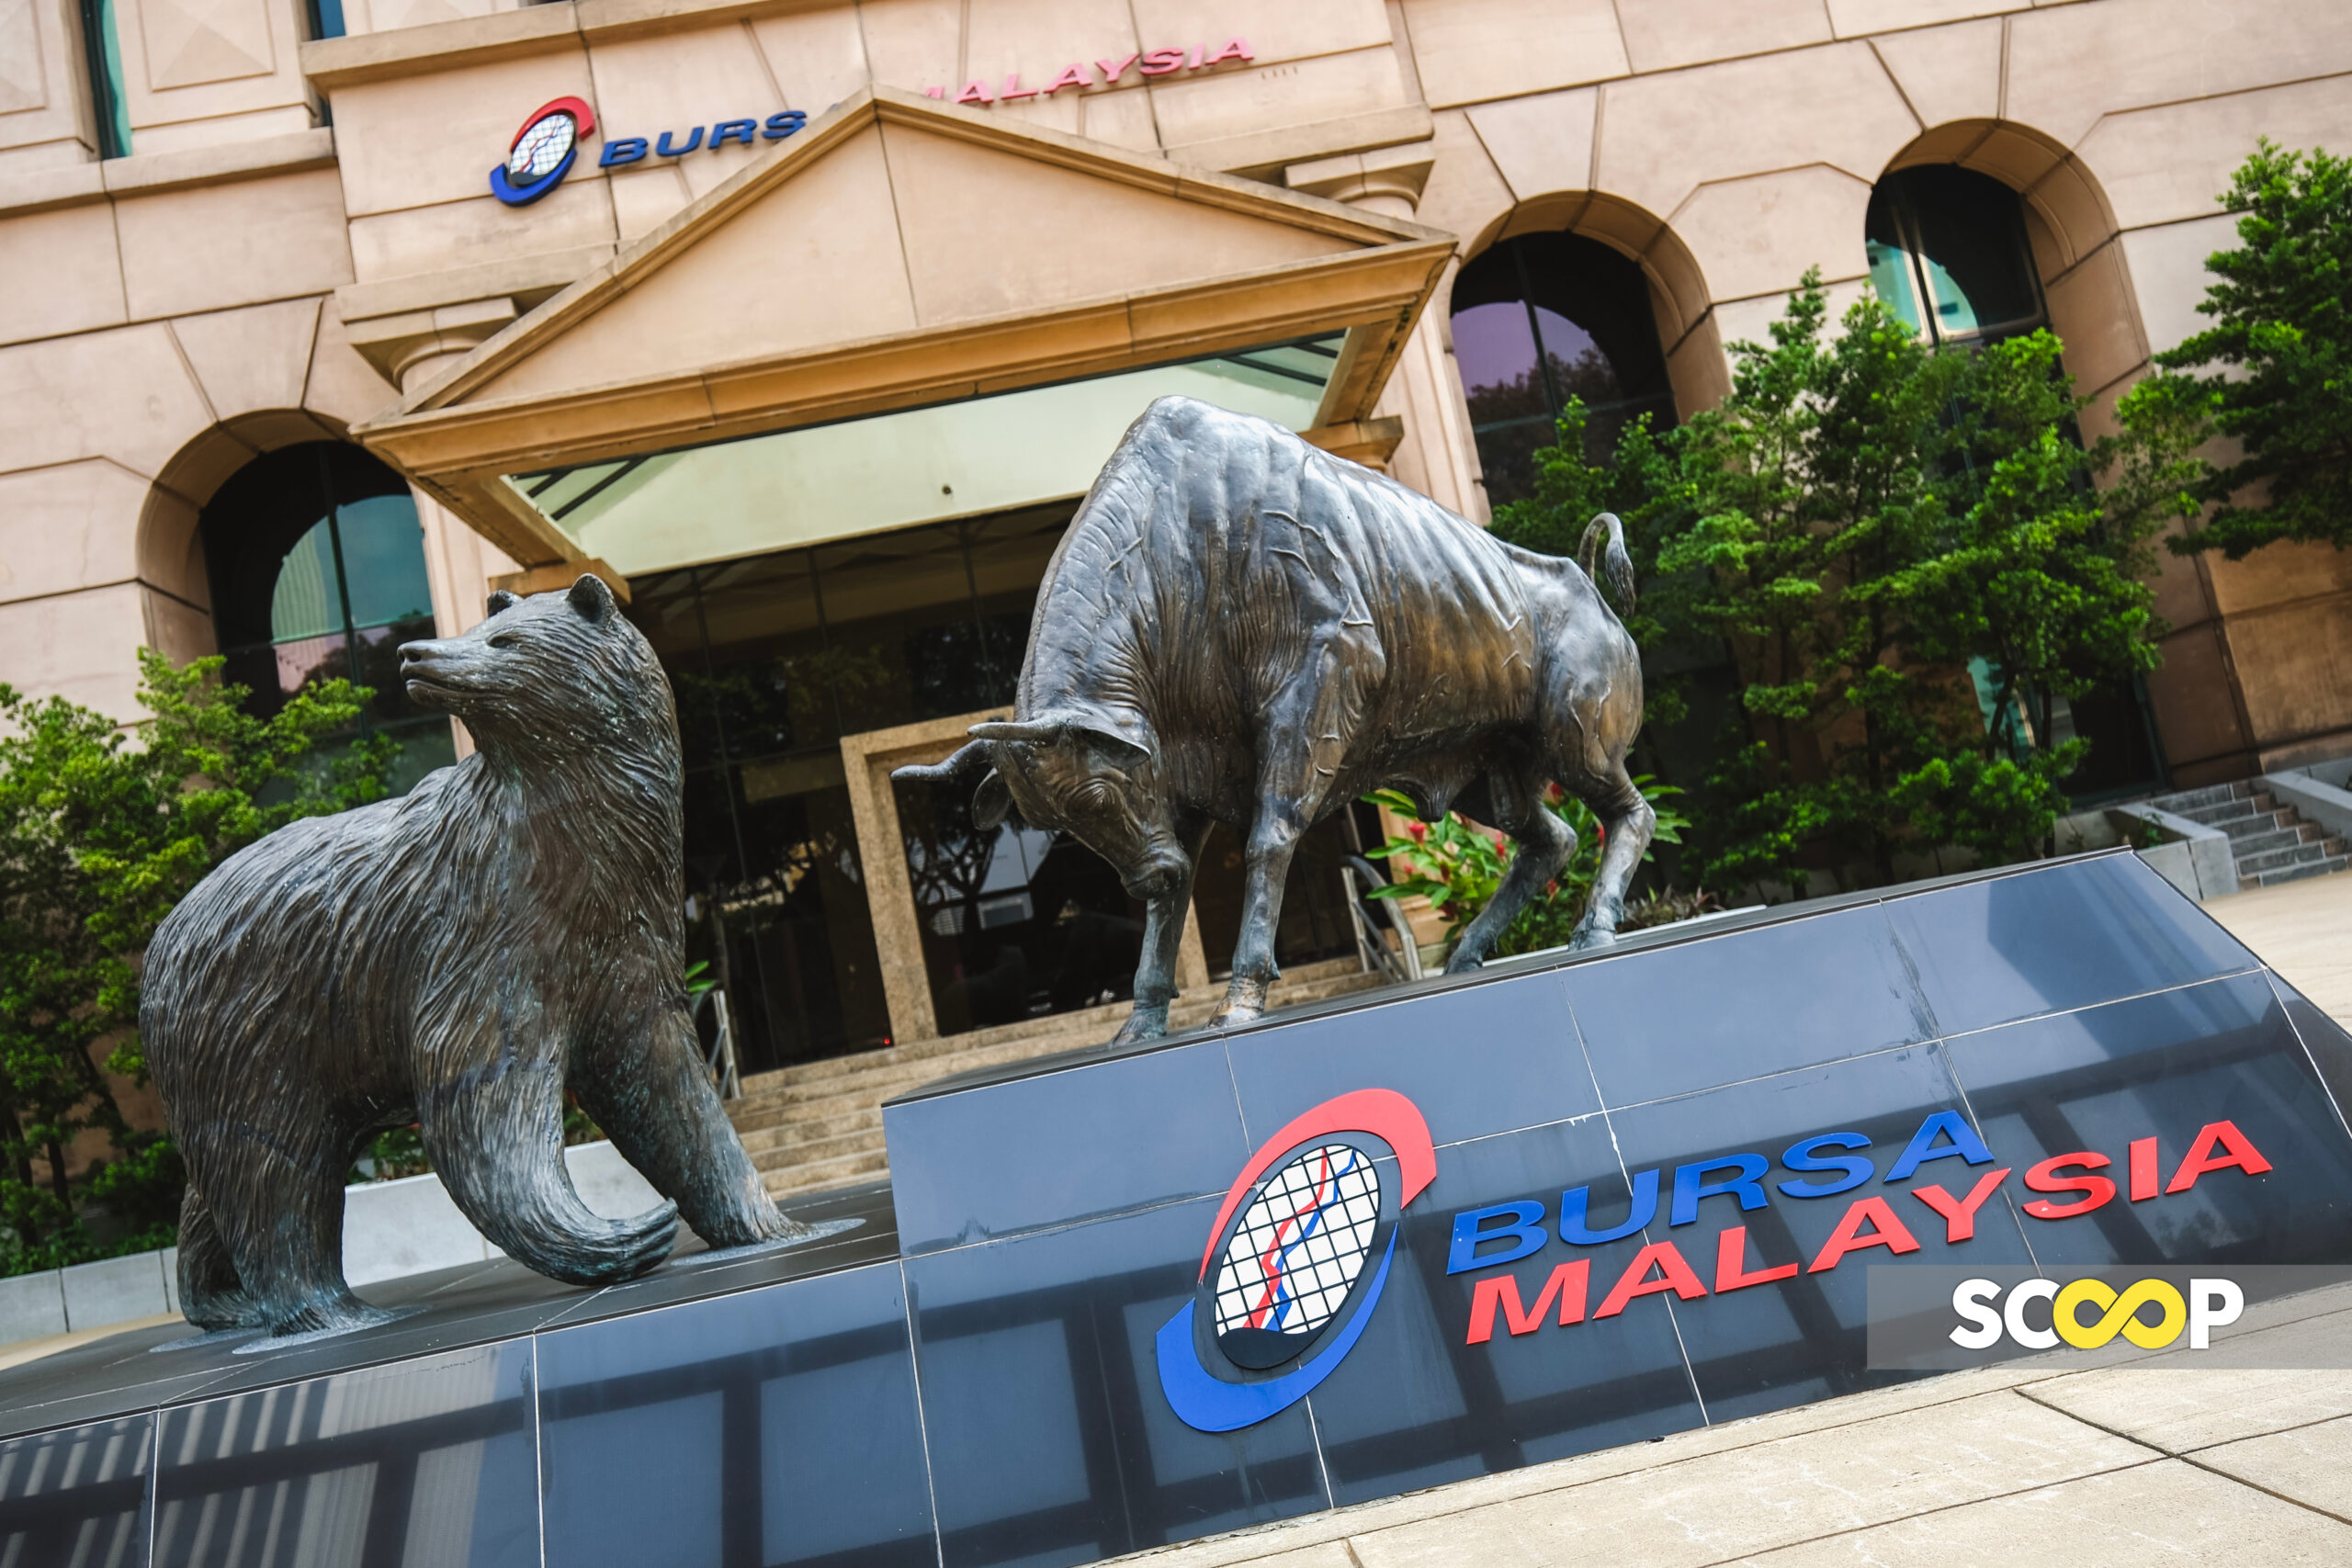 Bursa Malaysia begins day lower, expected to pick up later 